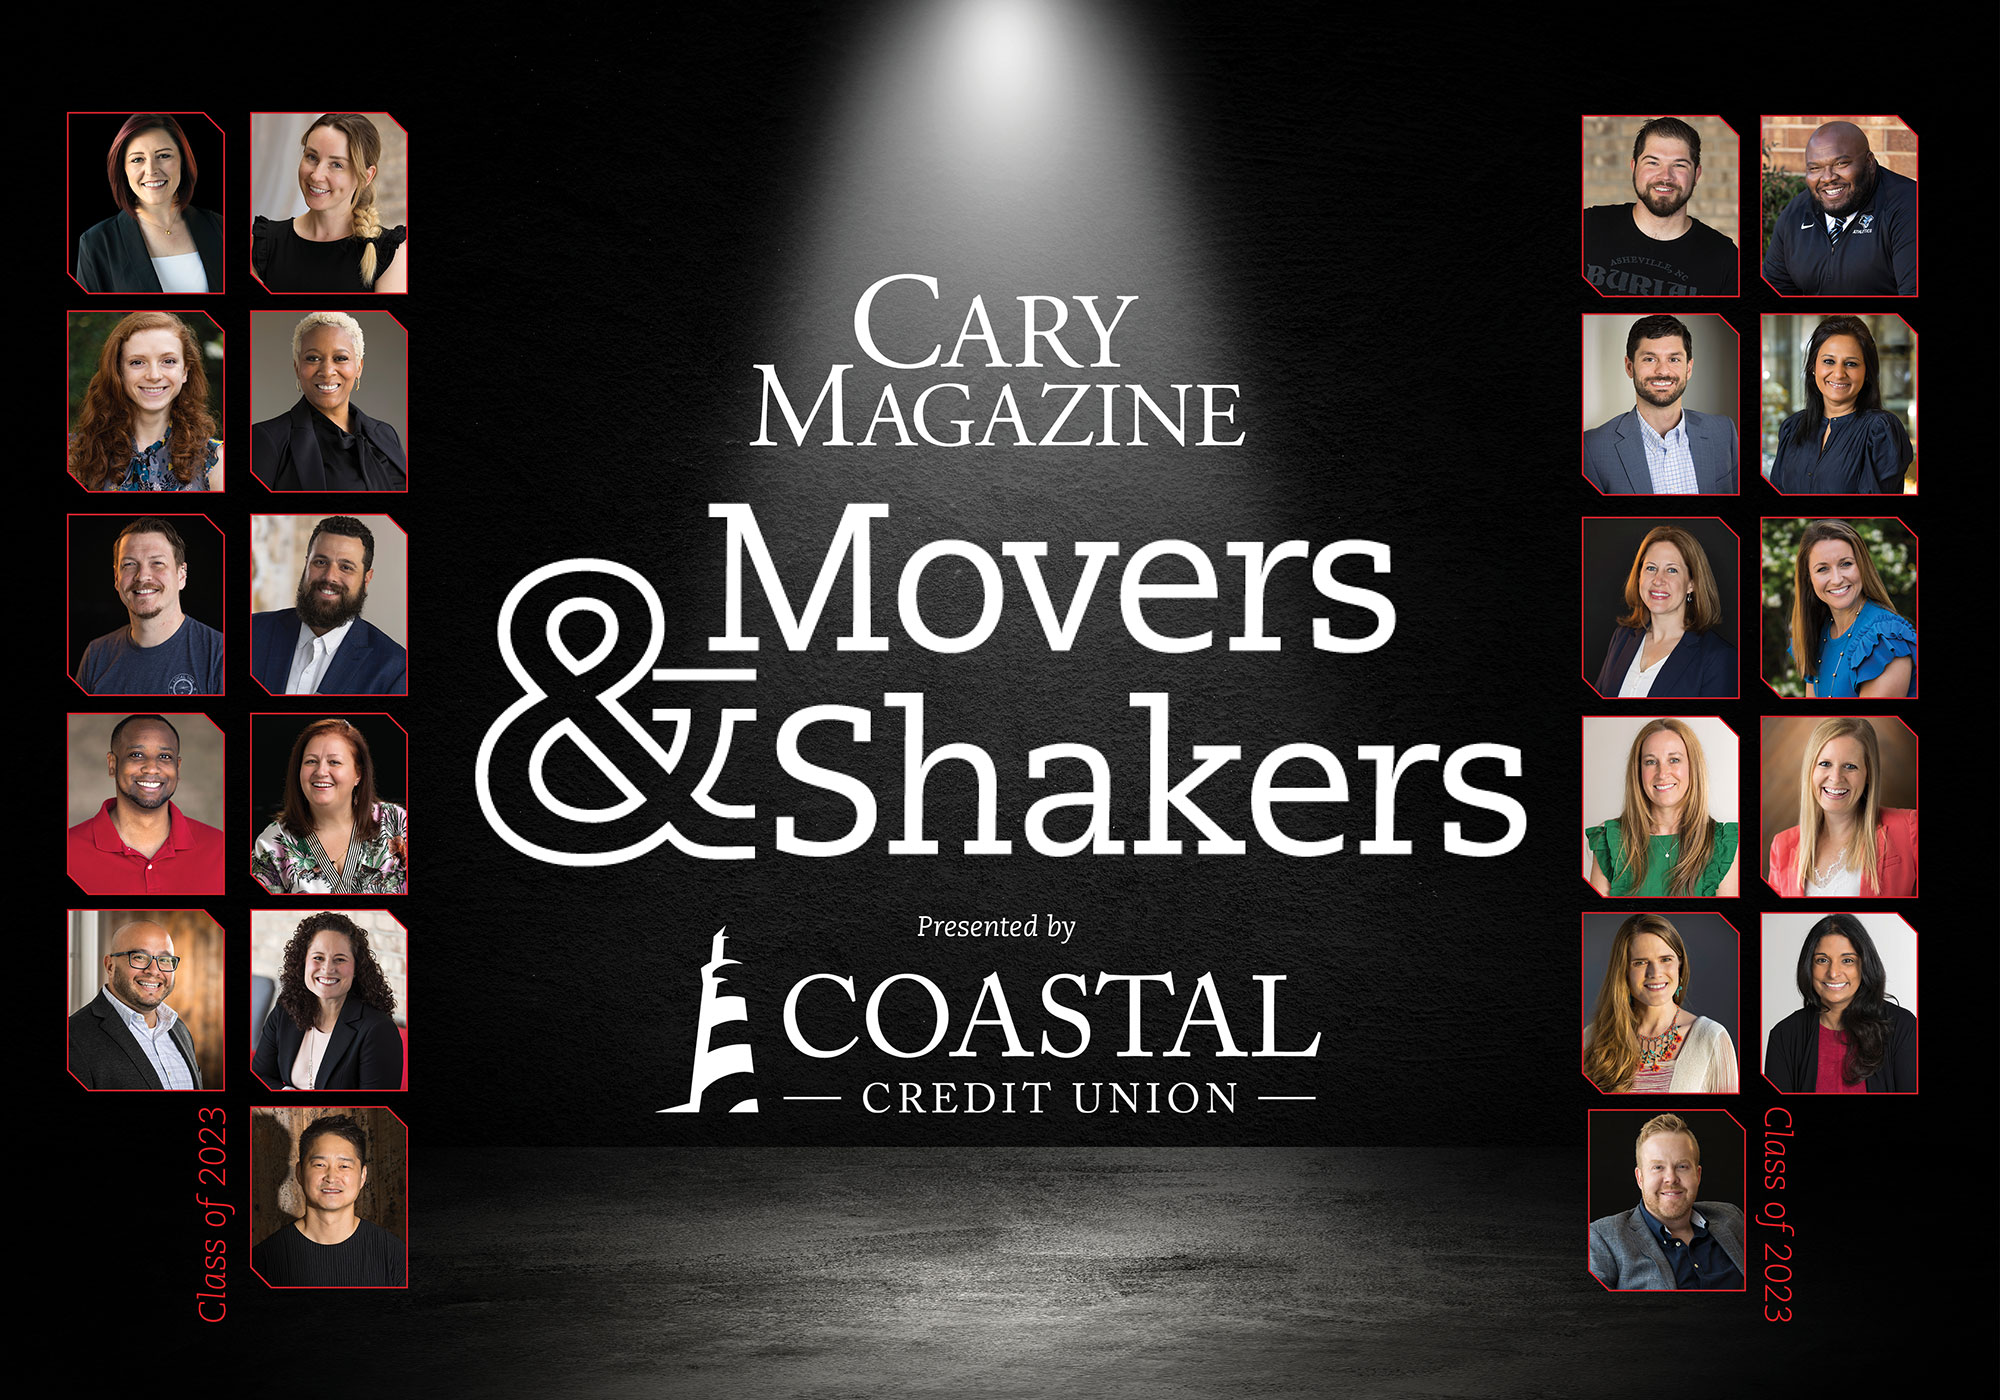 Movers & Shakers 2023